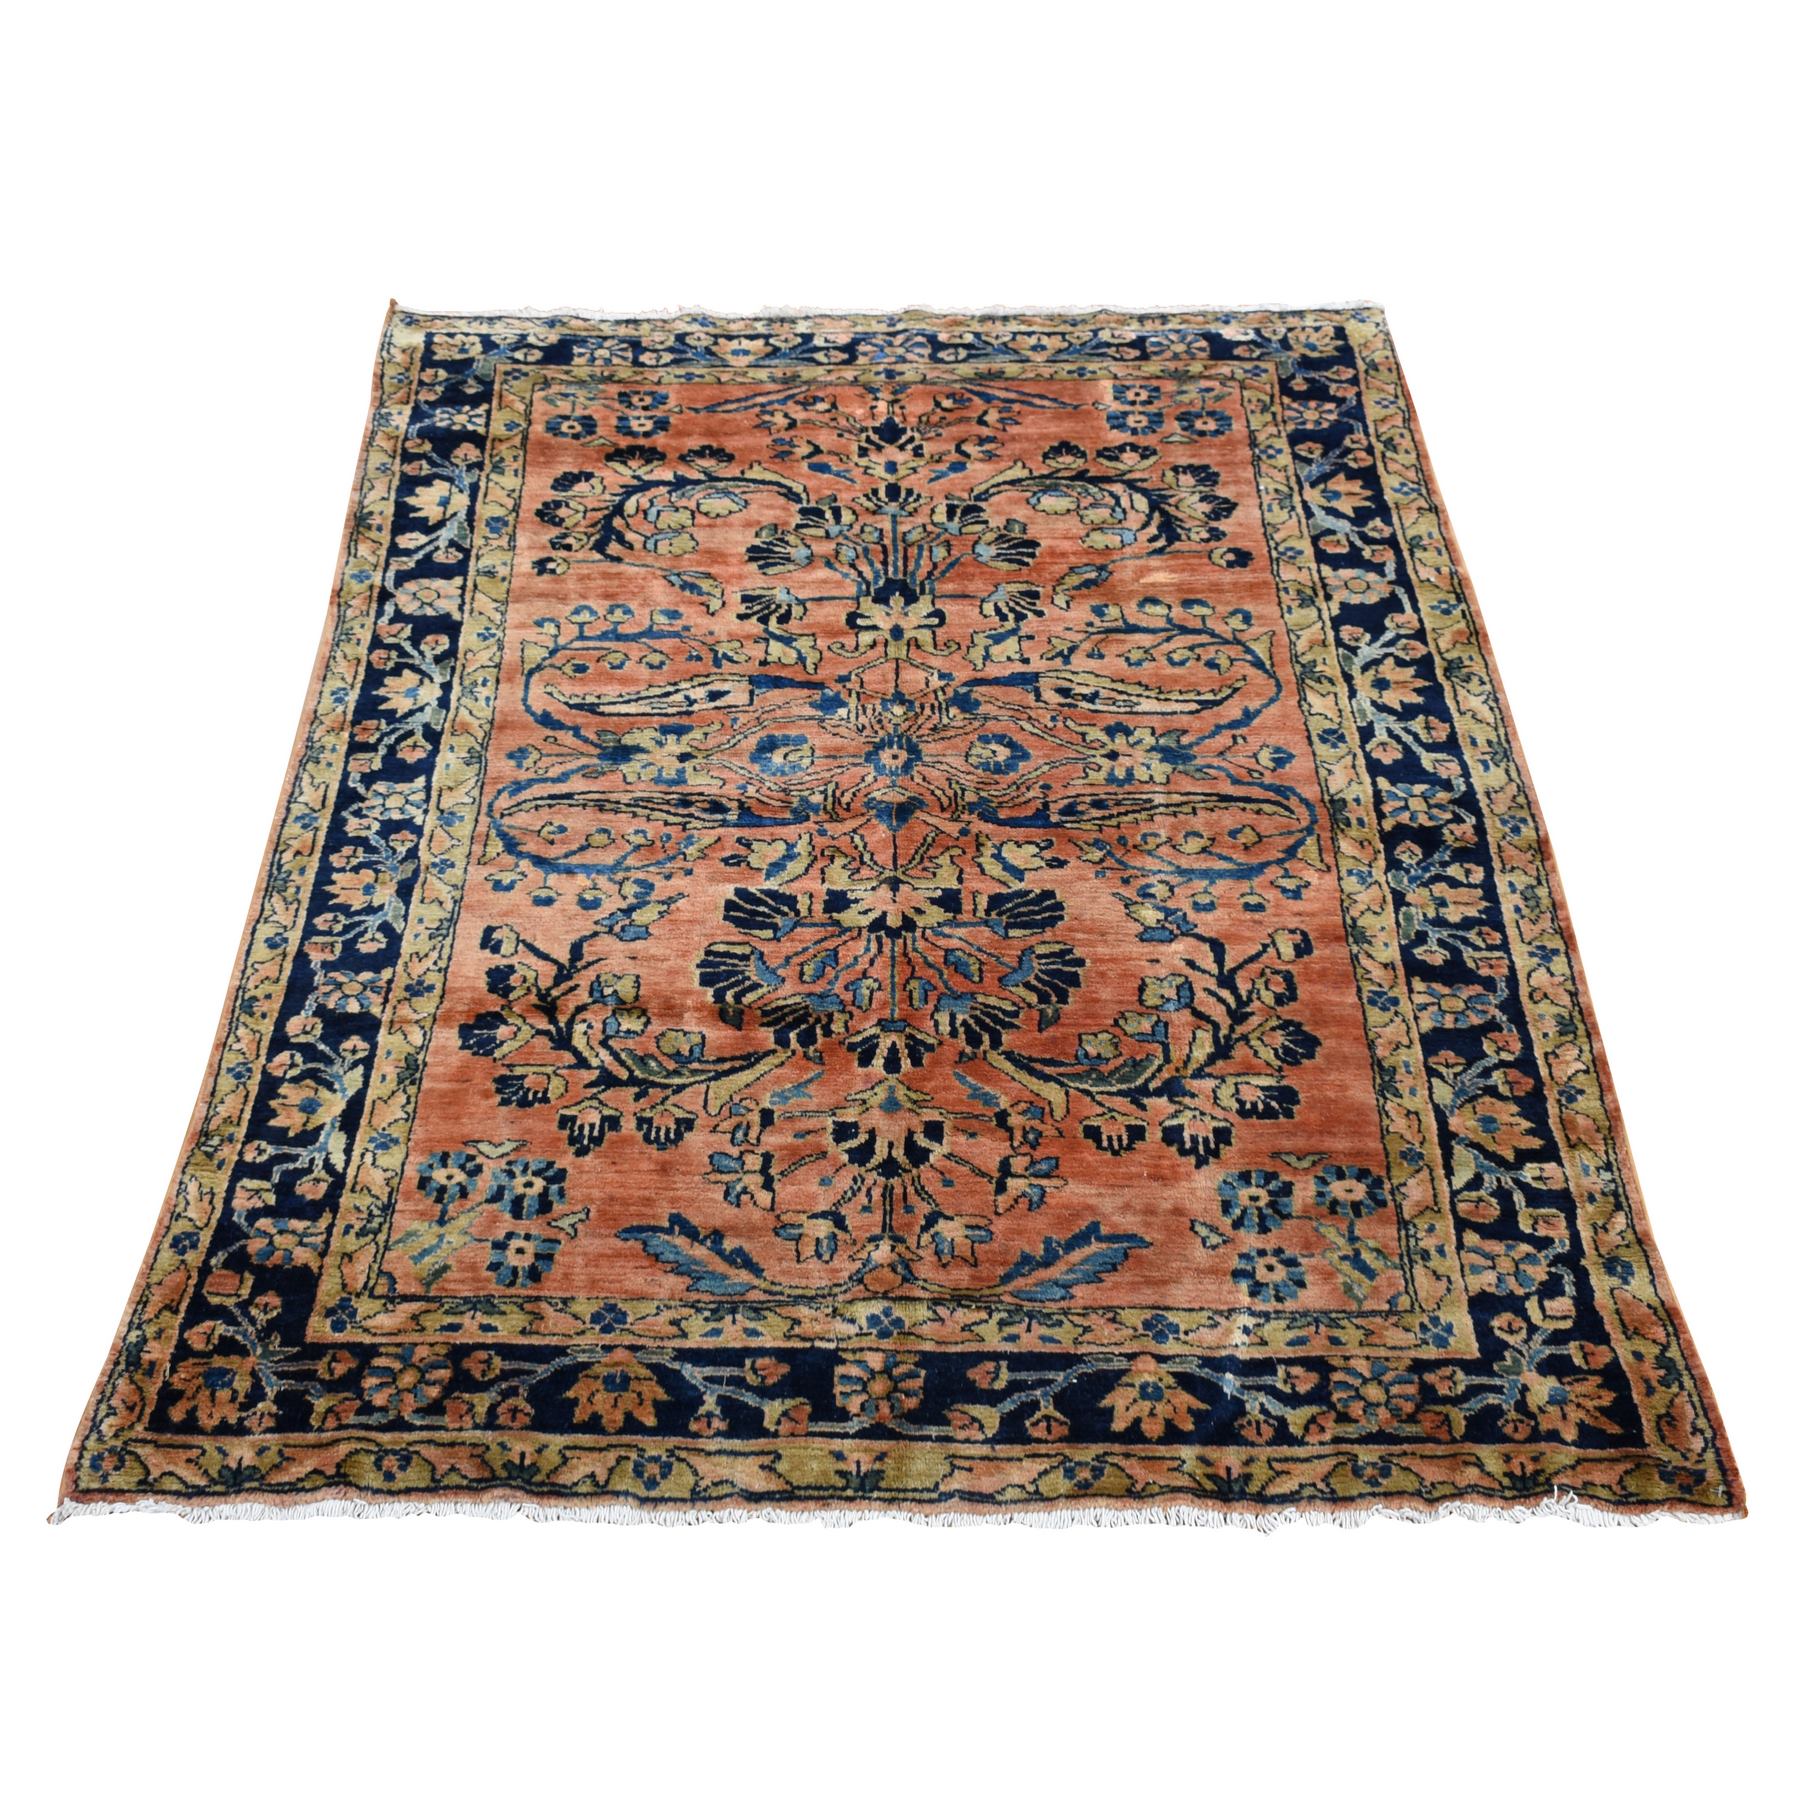  Wool Hand-Knotted Area Rug 4'9